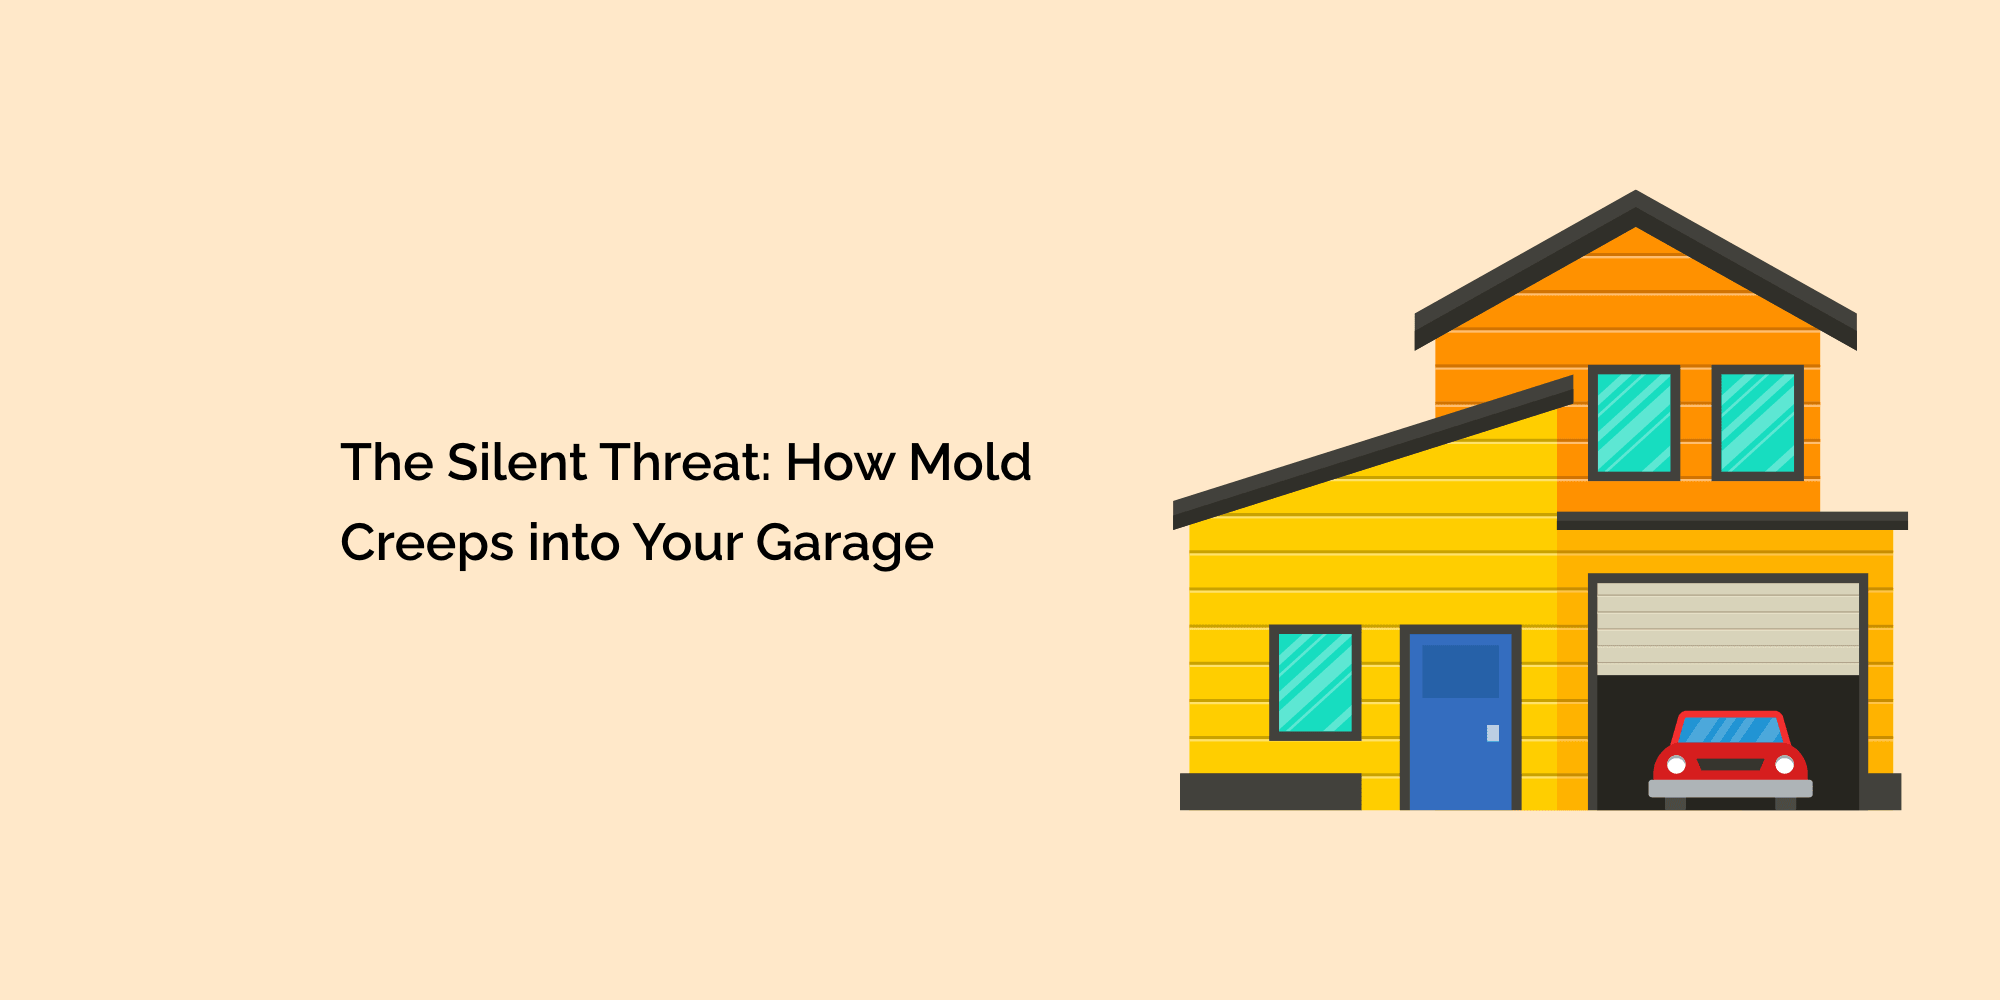 The Silent Threat: How Mold Creeps into Your Garage